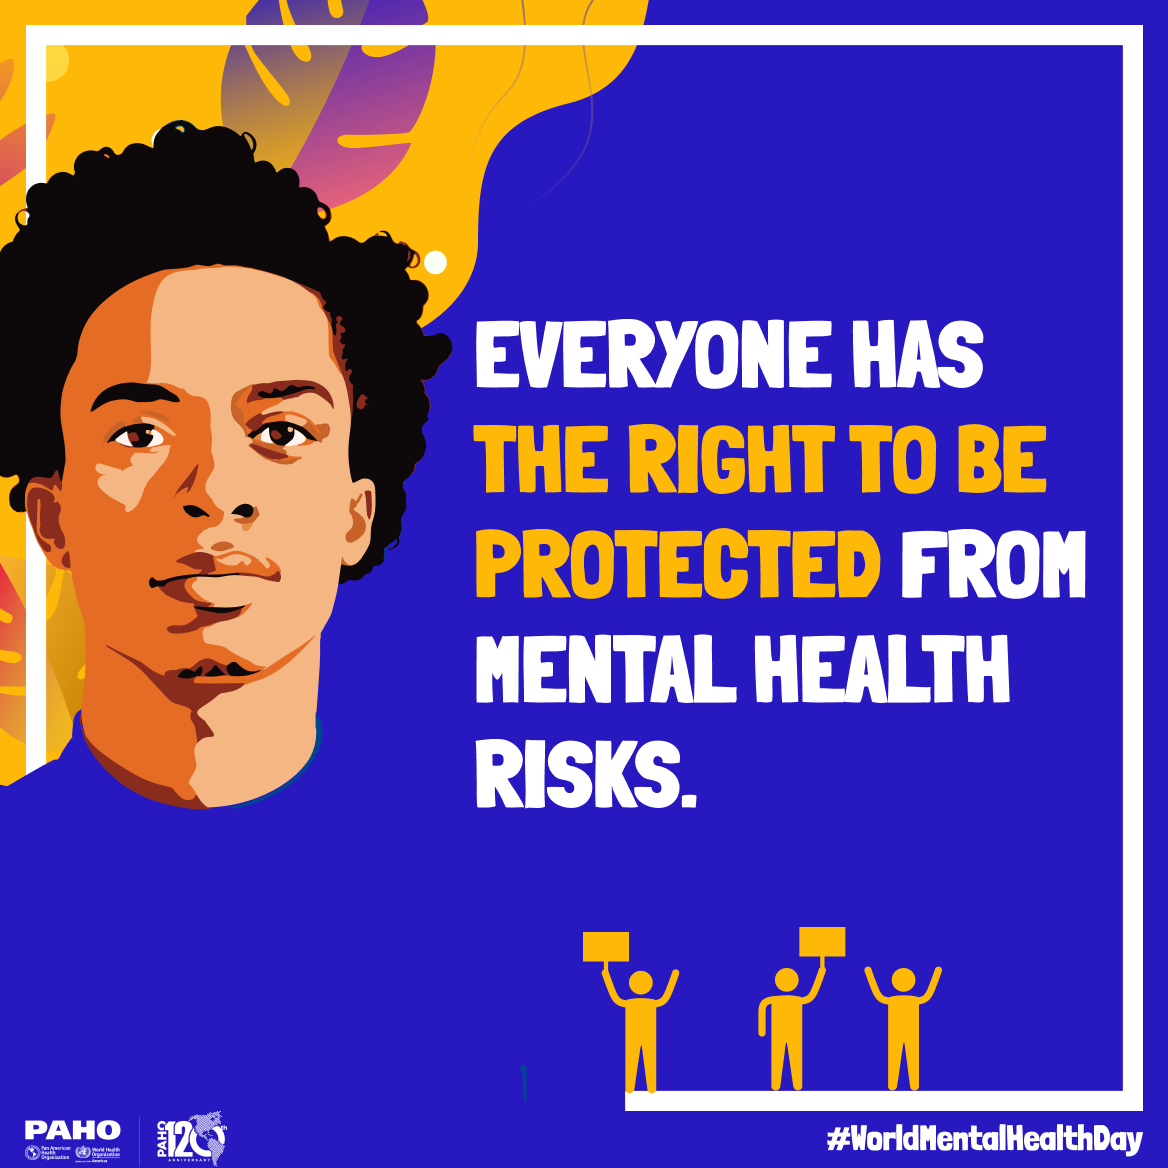 Everyone has the right to be protected from mental health risks.